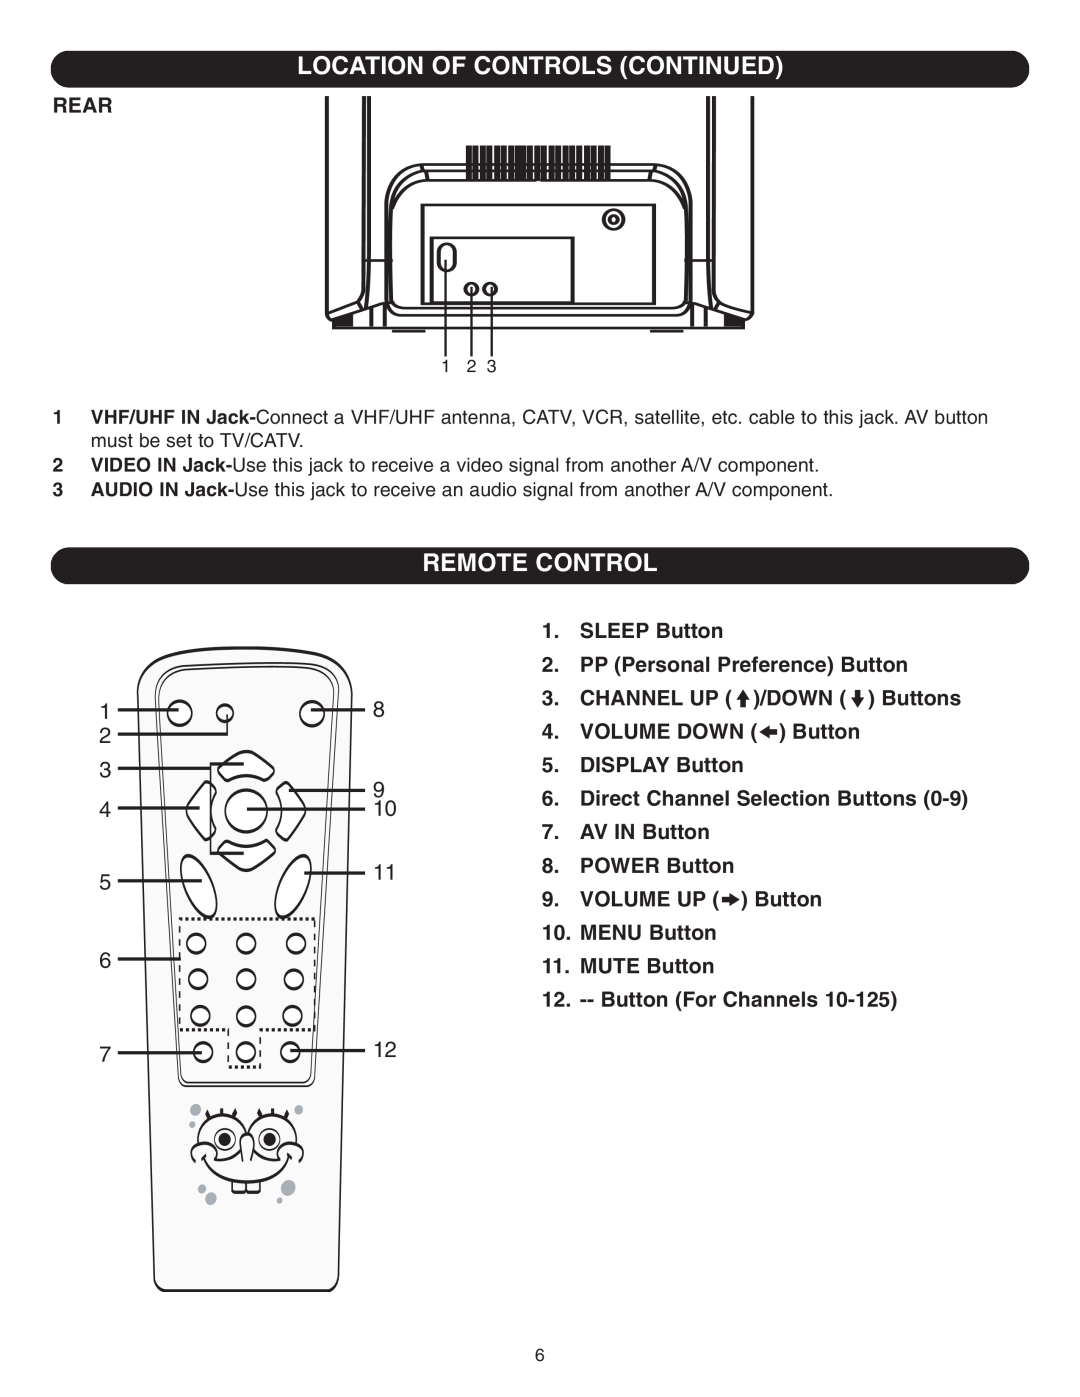 Emerson SB315 manual Location Of Controls Continued, Remote Control, Rear, SLEEP Button, PP Personal Preference Button 